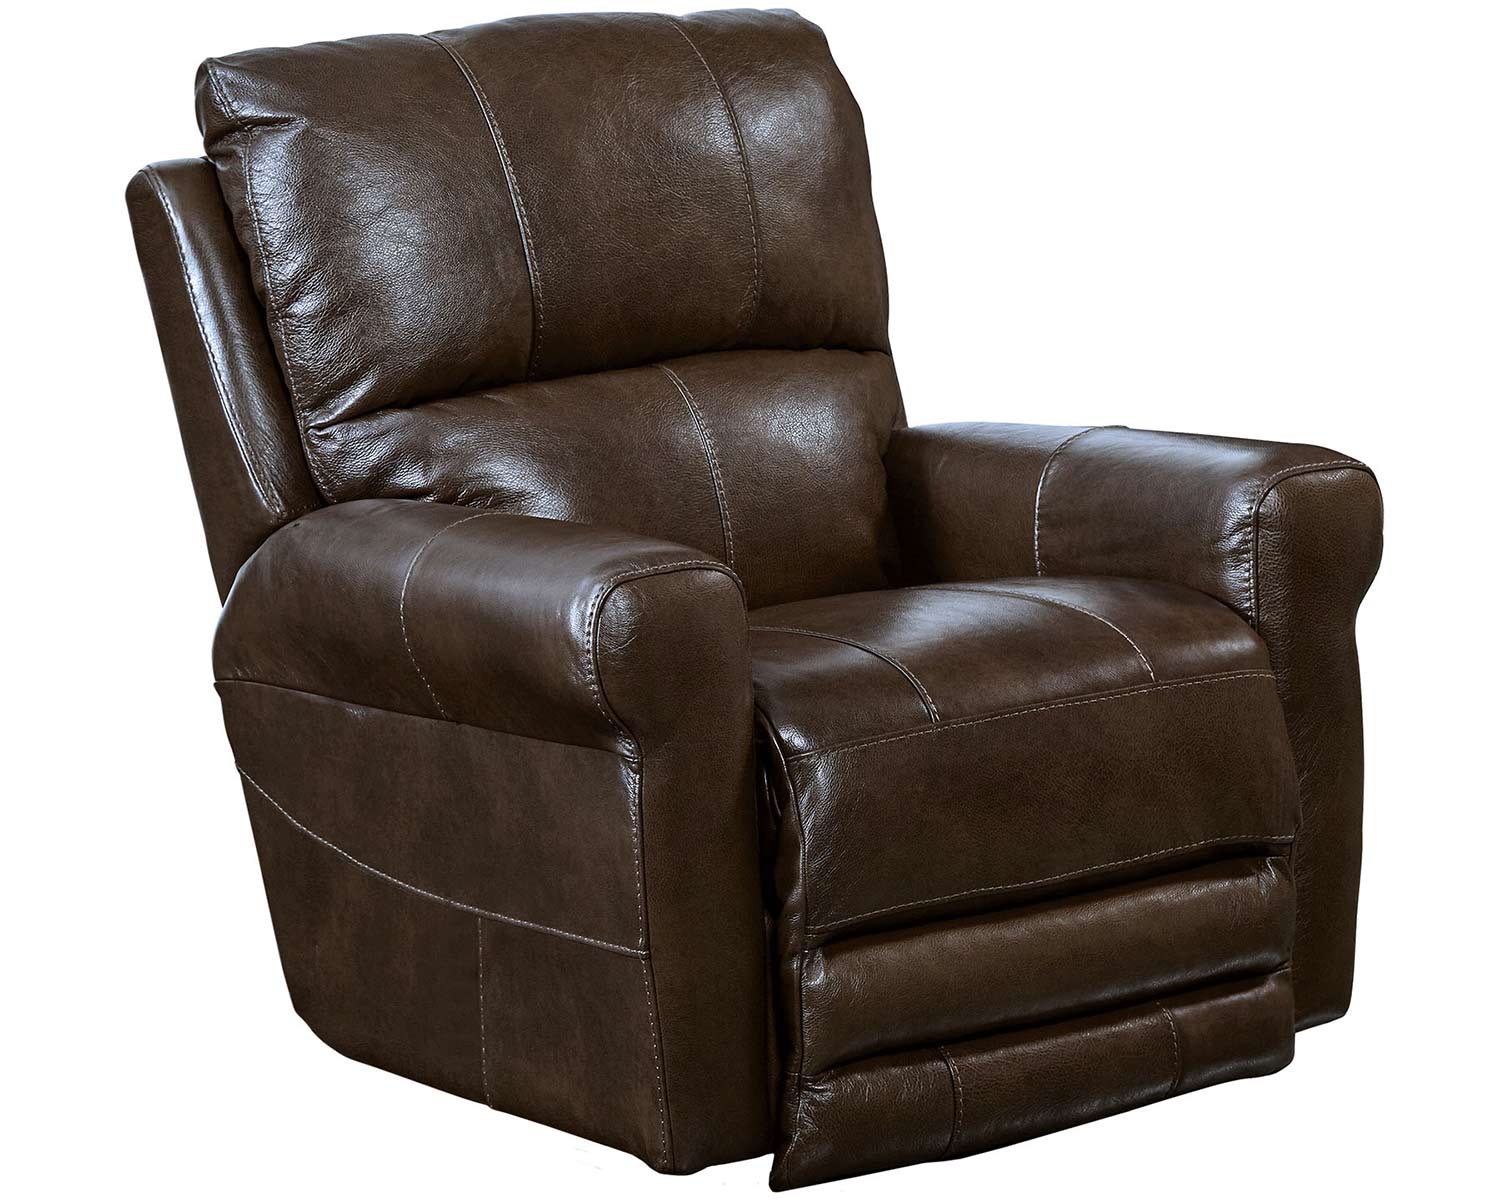 CatNapper Hoffner Leather Recliner Chair - Chocolate